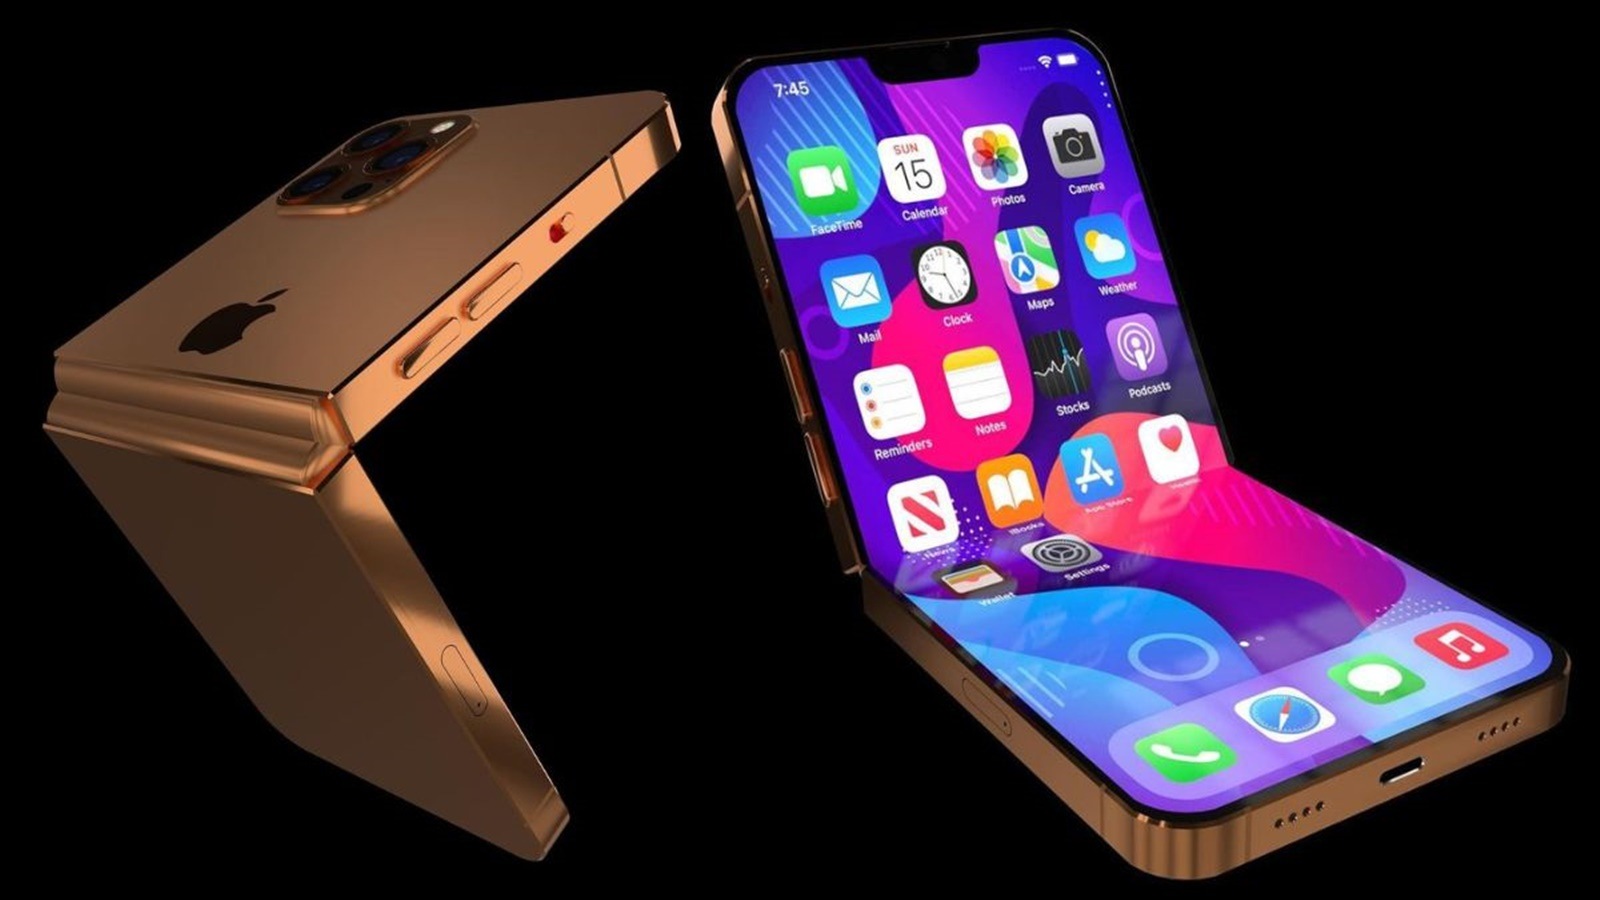 Why Apple's Foldable iPhone Won't Hit Shelves Until 2027? Inside Apple's Push for Flawless Design